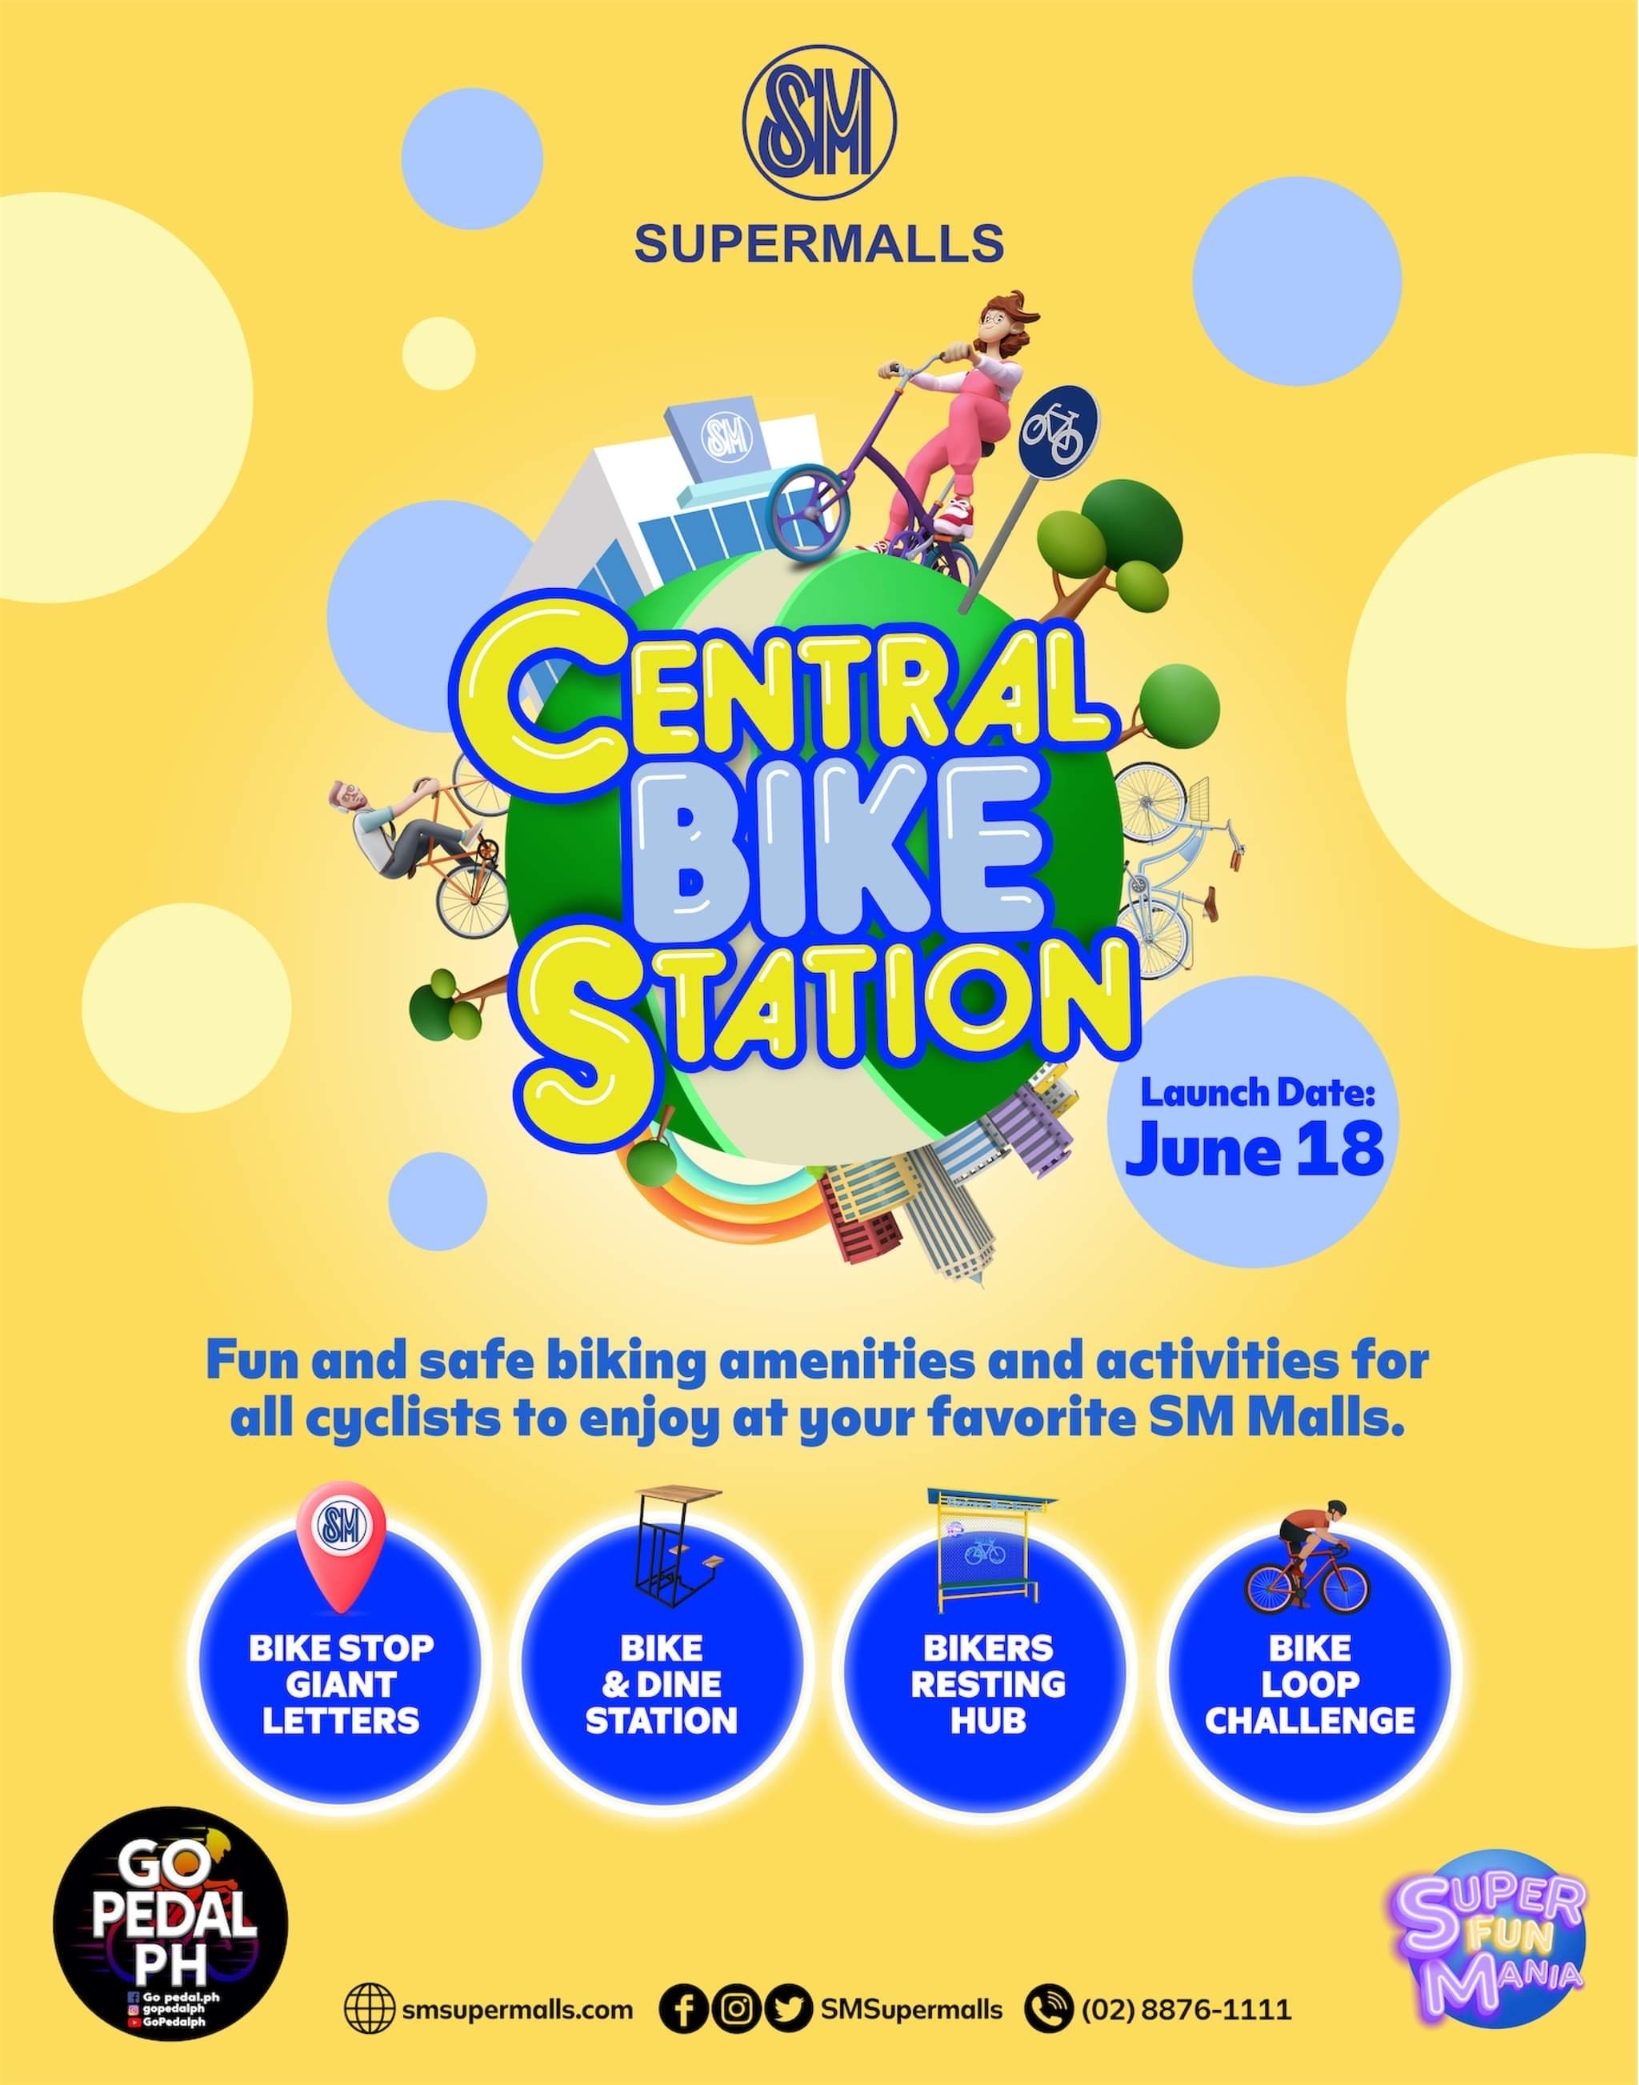 SM Supermalls Launches the Central Bike Station in Select SM Malls